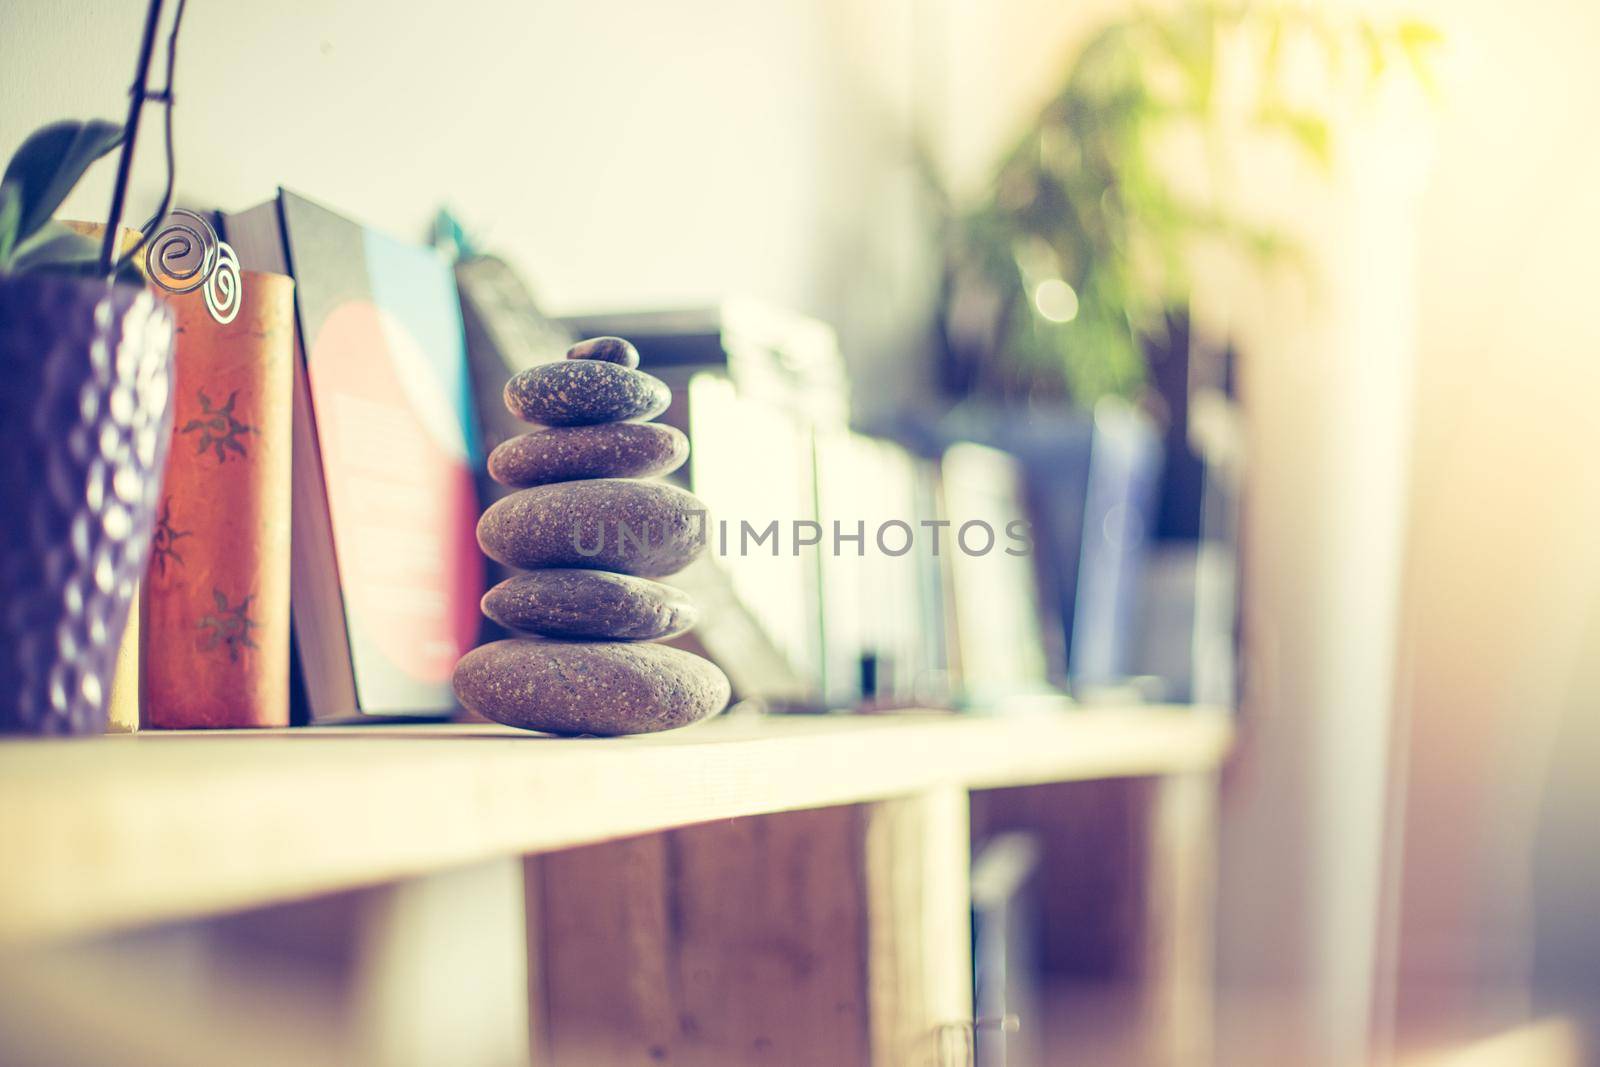 Feng Shui: Stone cairn in the foreground, blurry living room in the background. Balance and relaxation.